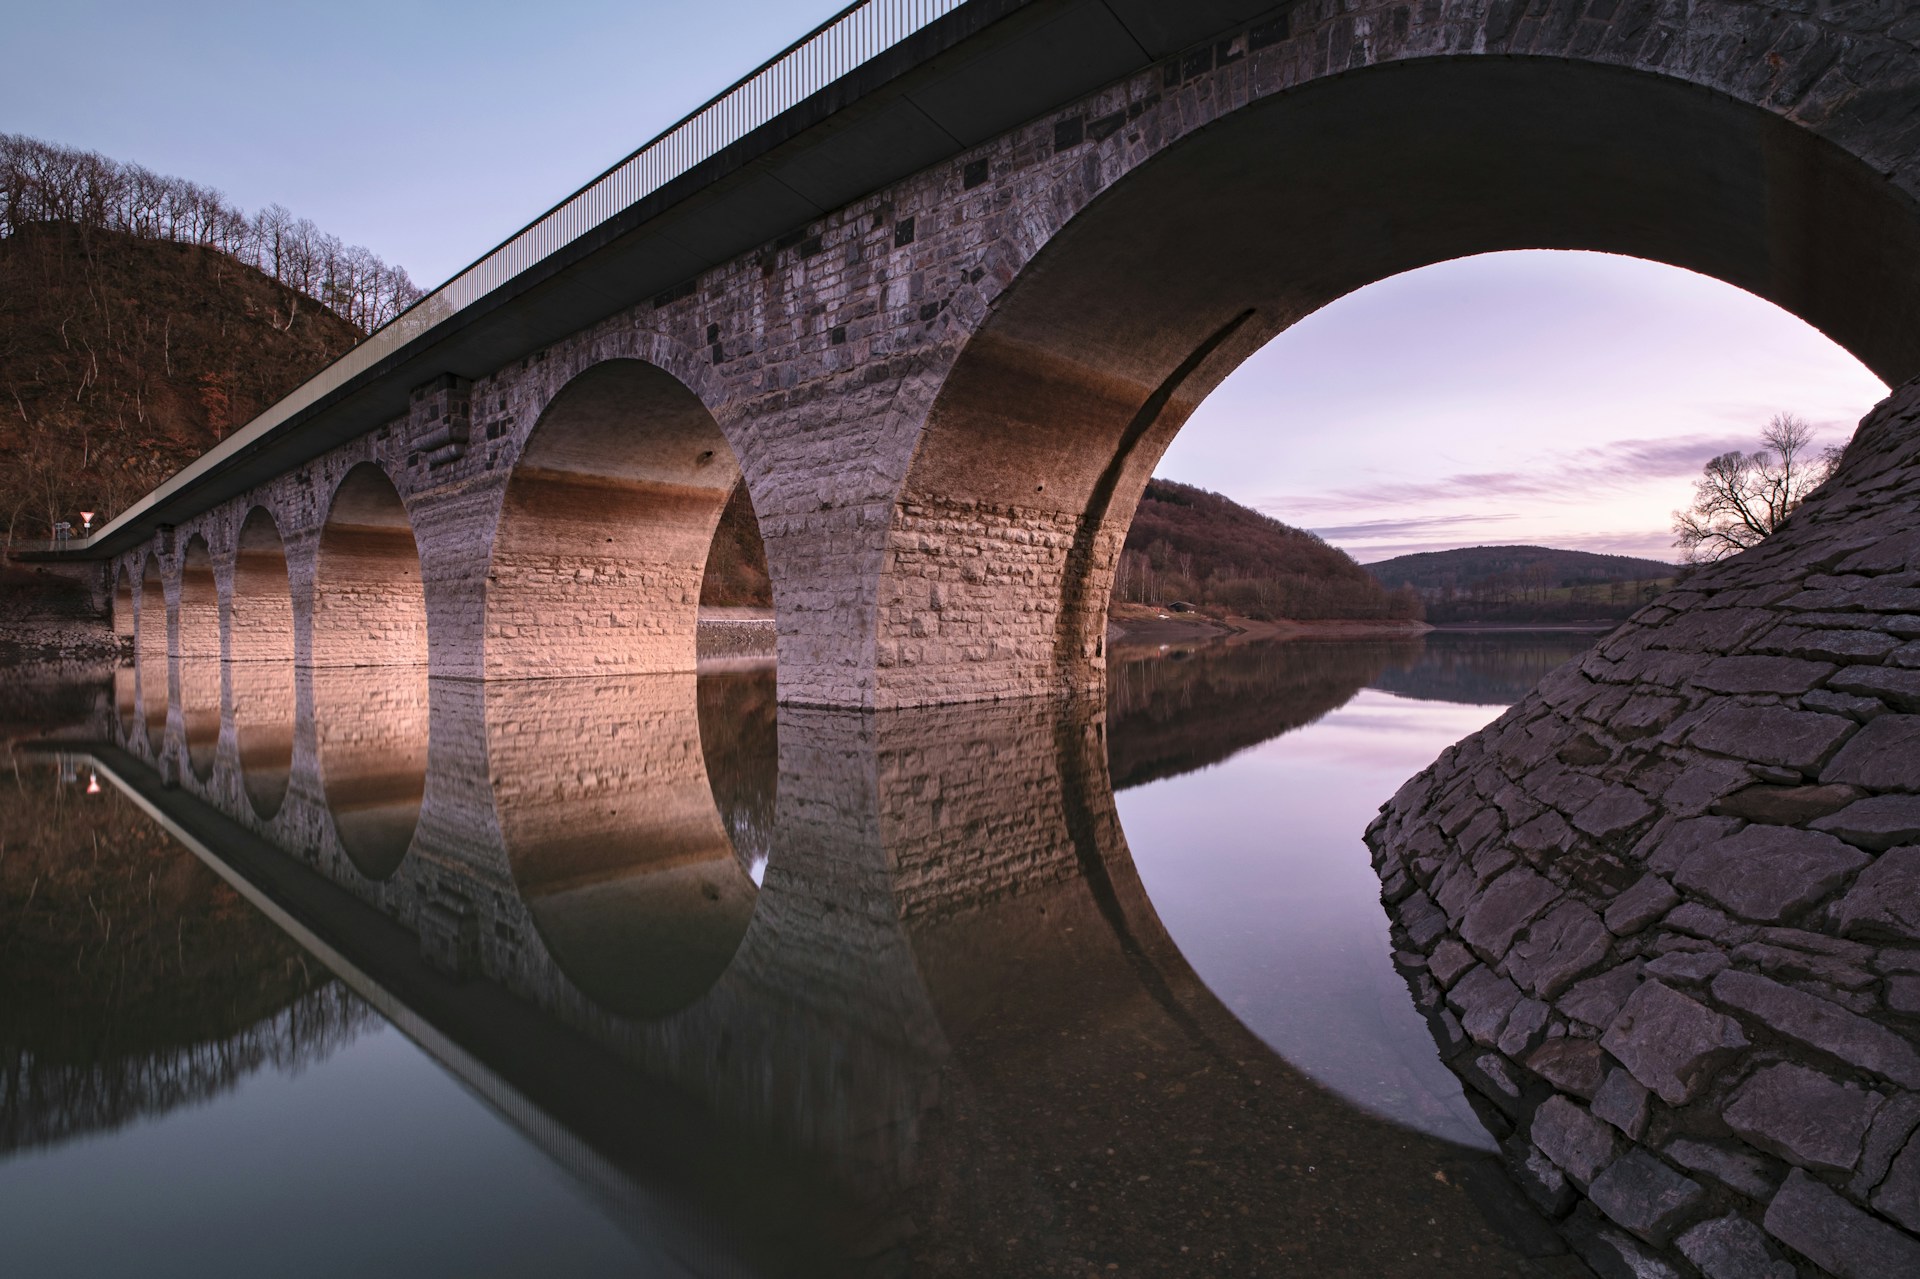 Stone bridge with multiple arches reflected in the calm water below. The landscape around the bridge is serene, with bare trees on the hills and a slightly pinkish sky at dusk. The overall atmosphere is tranquil and picturesque, offering a stark contrast to the origins of trauma hidden deep within nature’s quiet beauty.